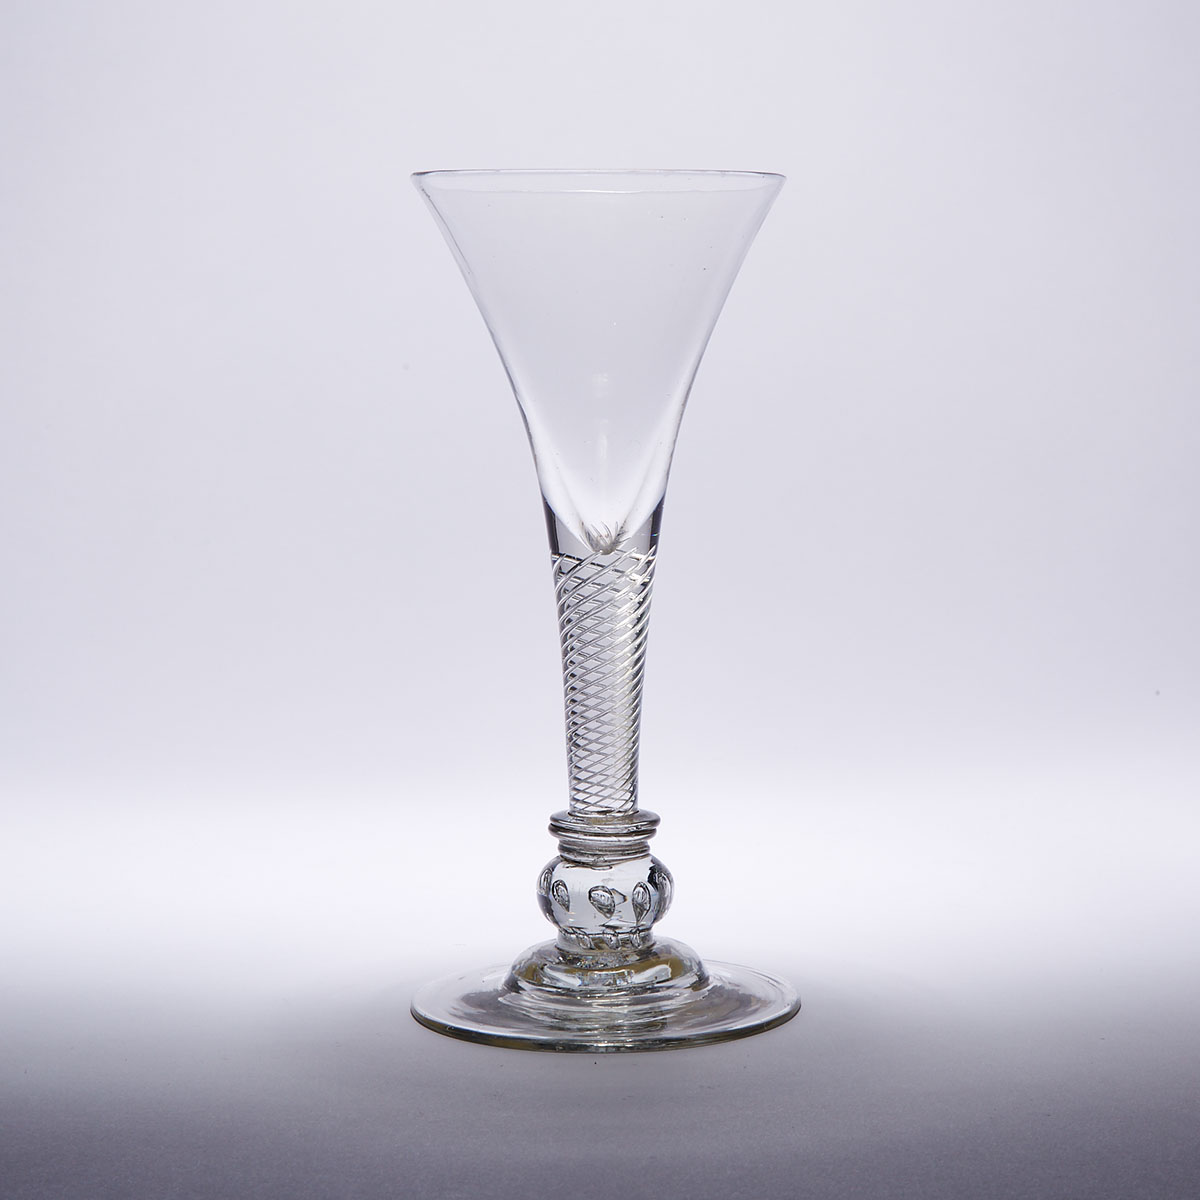 English Teared Knop Airtwist Composite Stemmed Wine Glass, mid-18th century